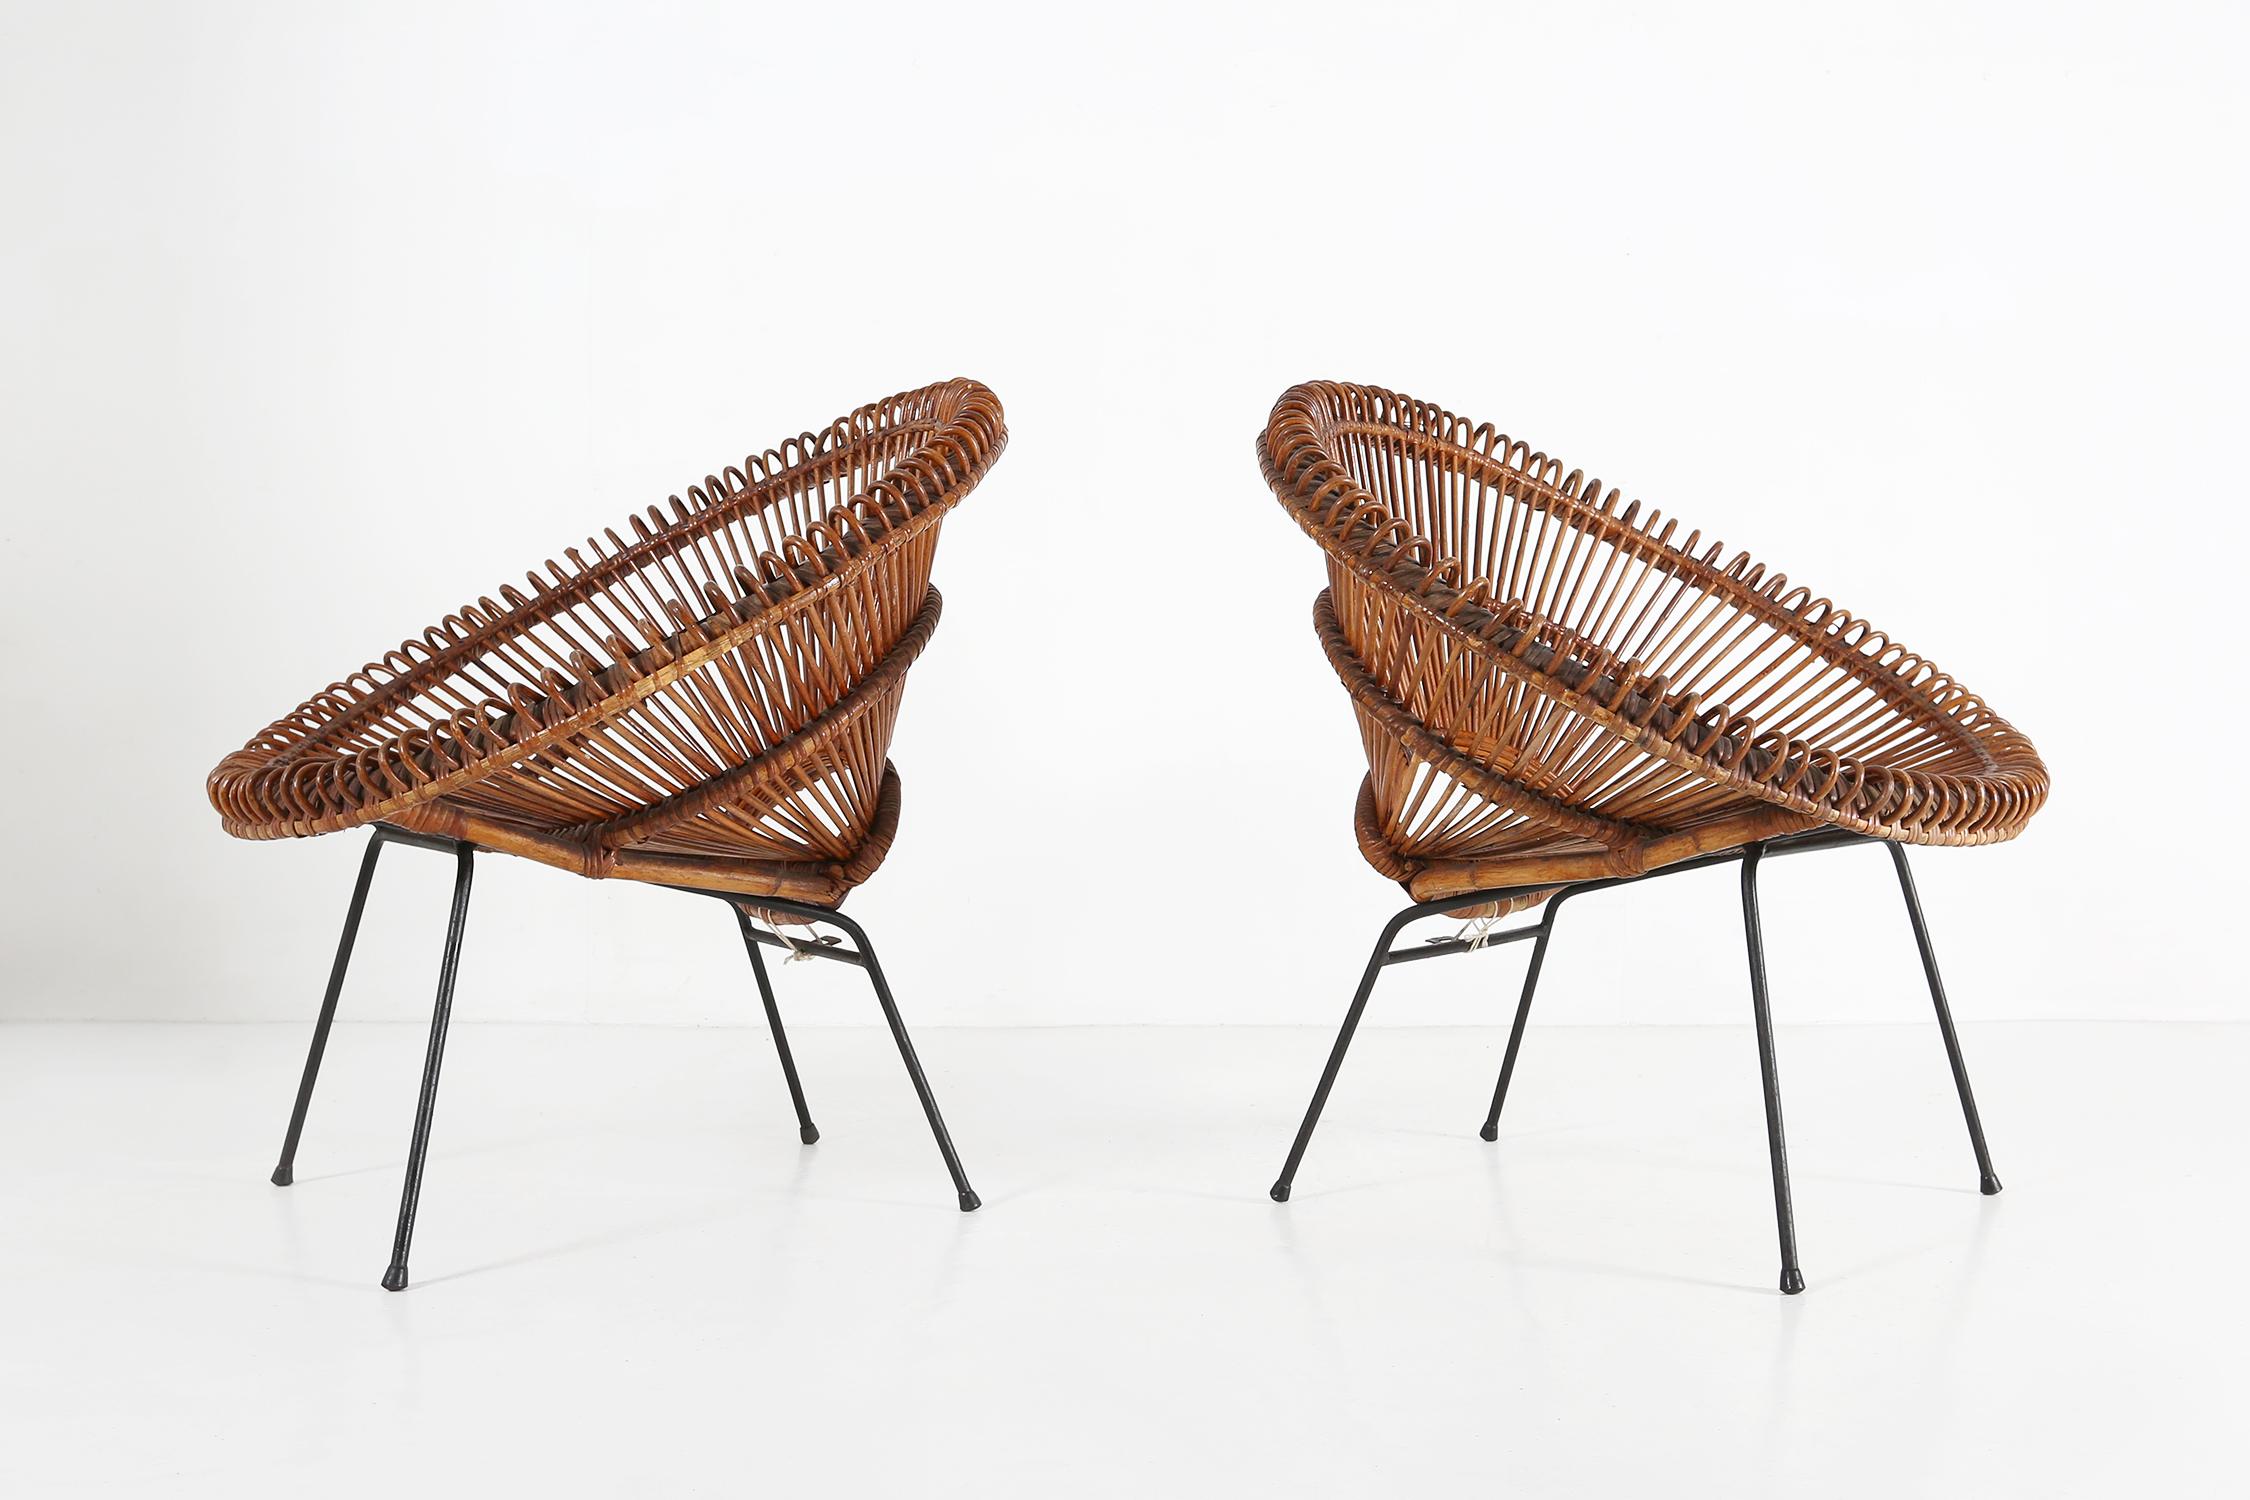 Pair of armchairs by Janine Abraham & Dirk Jan Rol.
Made of black metal base and a rattan seat.